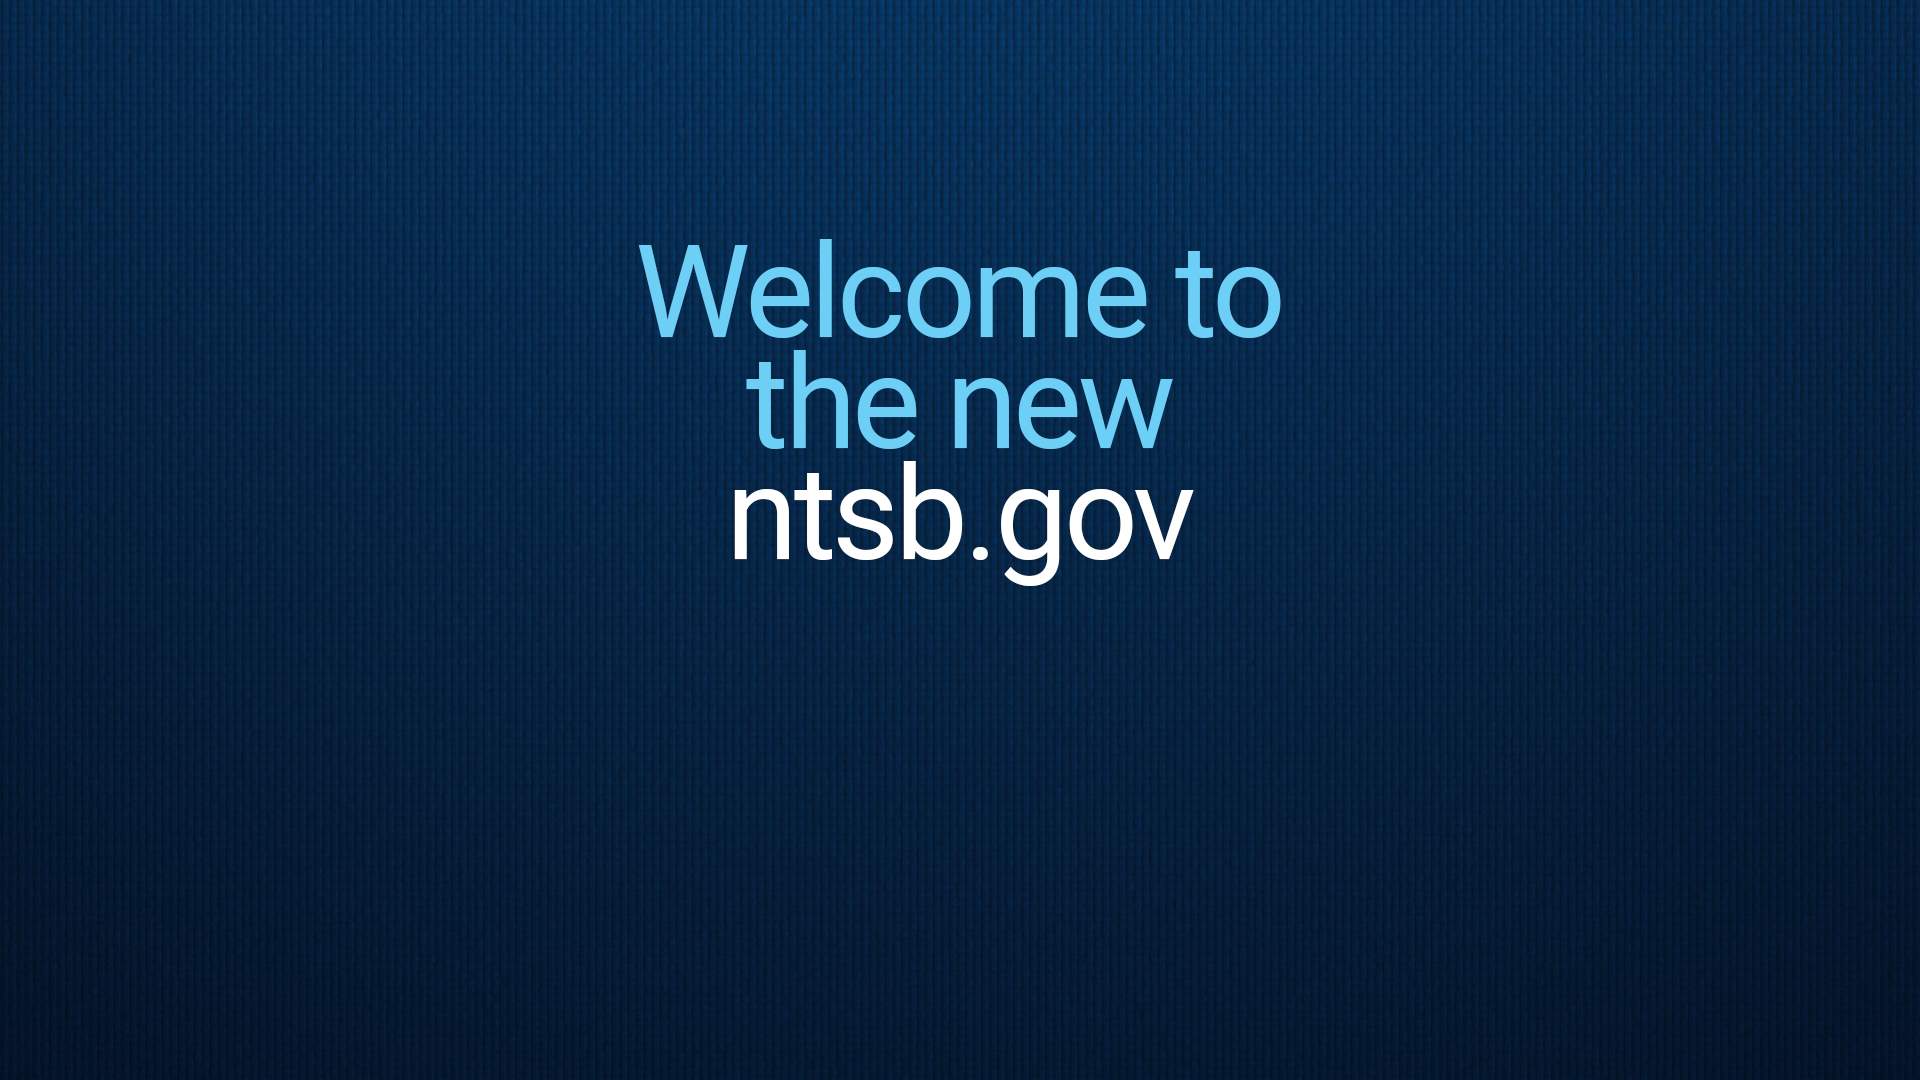 Welcome to the new ntsb.gov graphic.